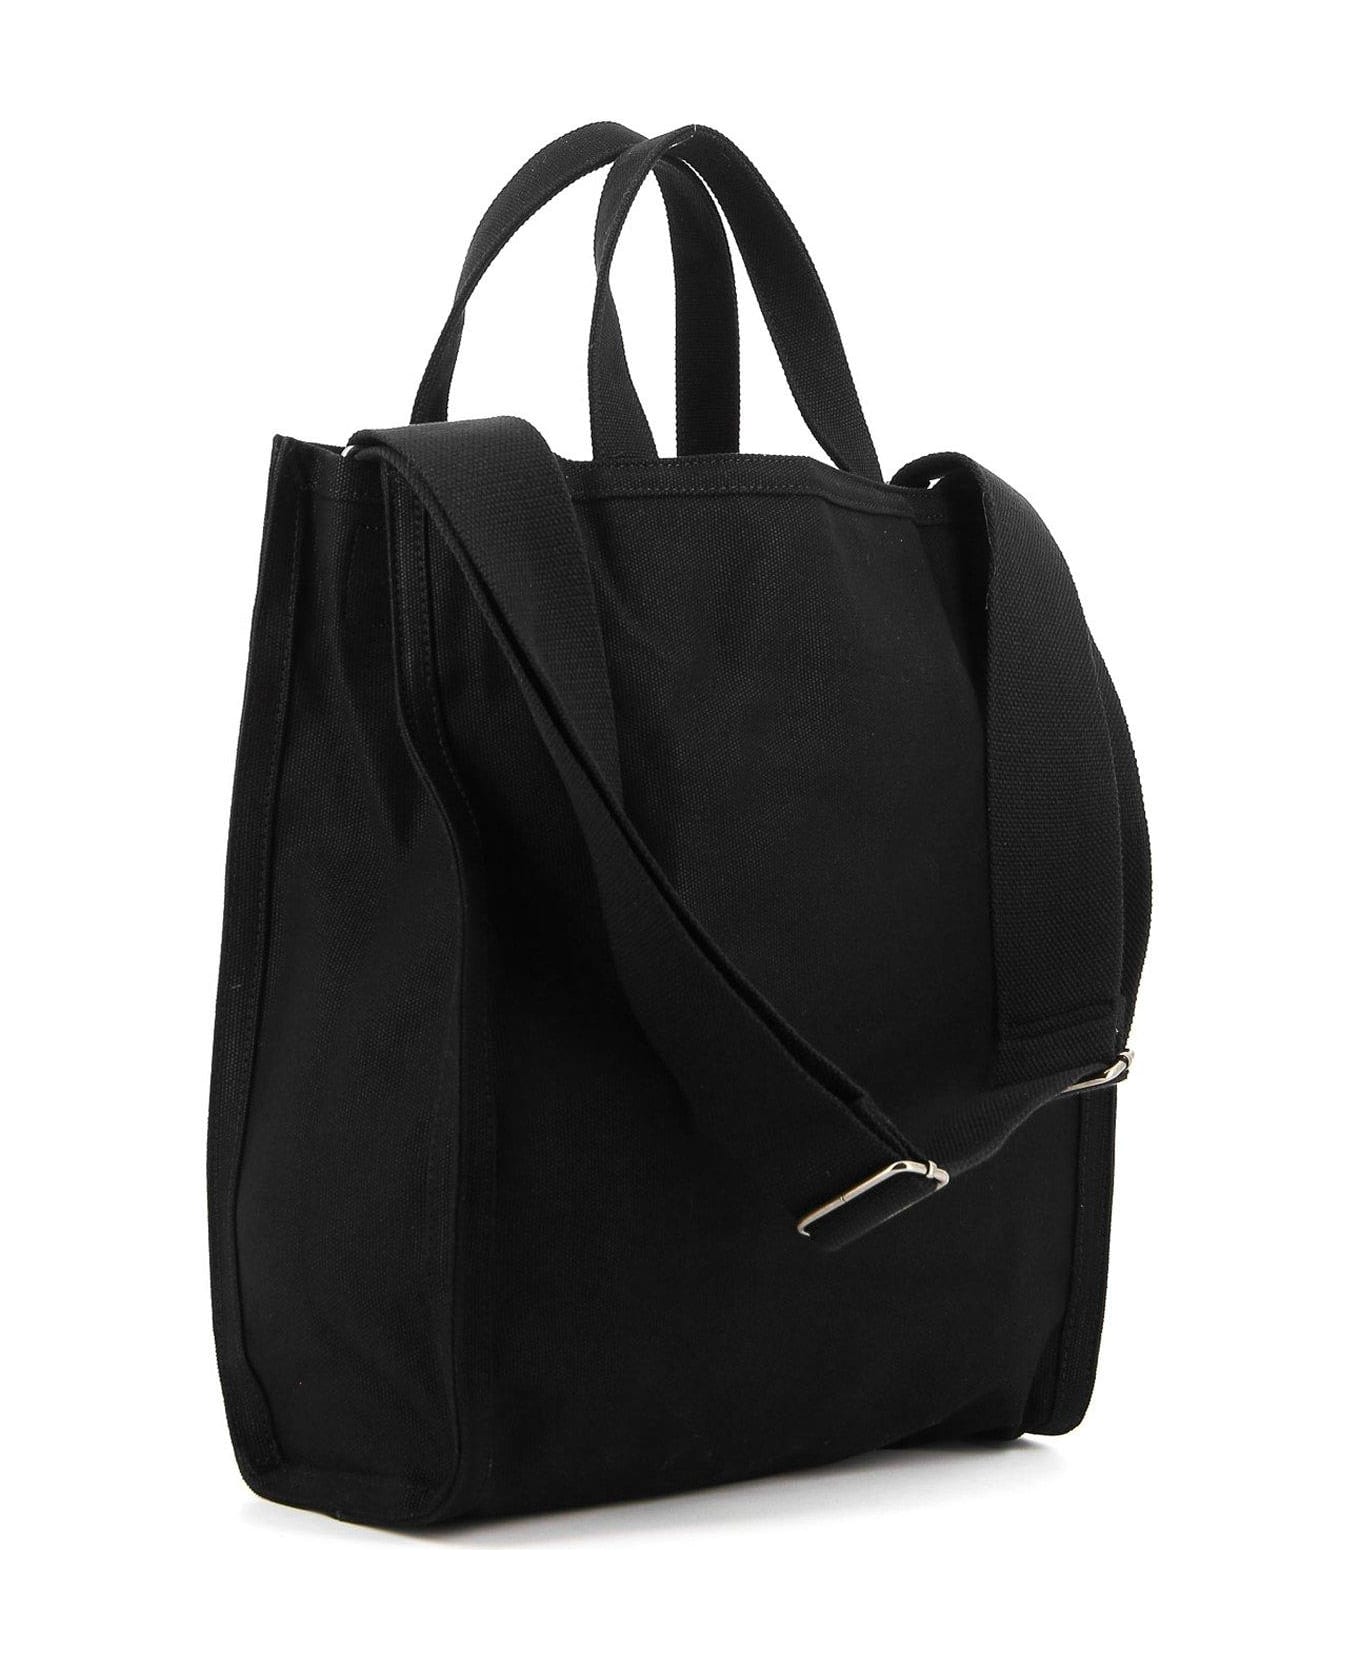 A.P.C. Recuperation Canvas Shopping Bag - LZZ トートバッグ